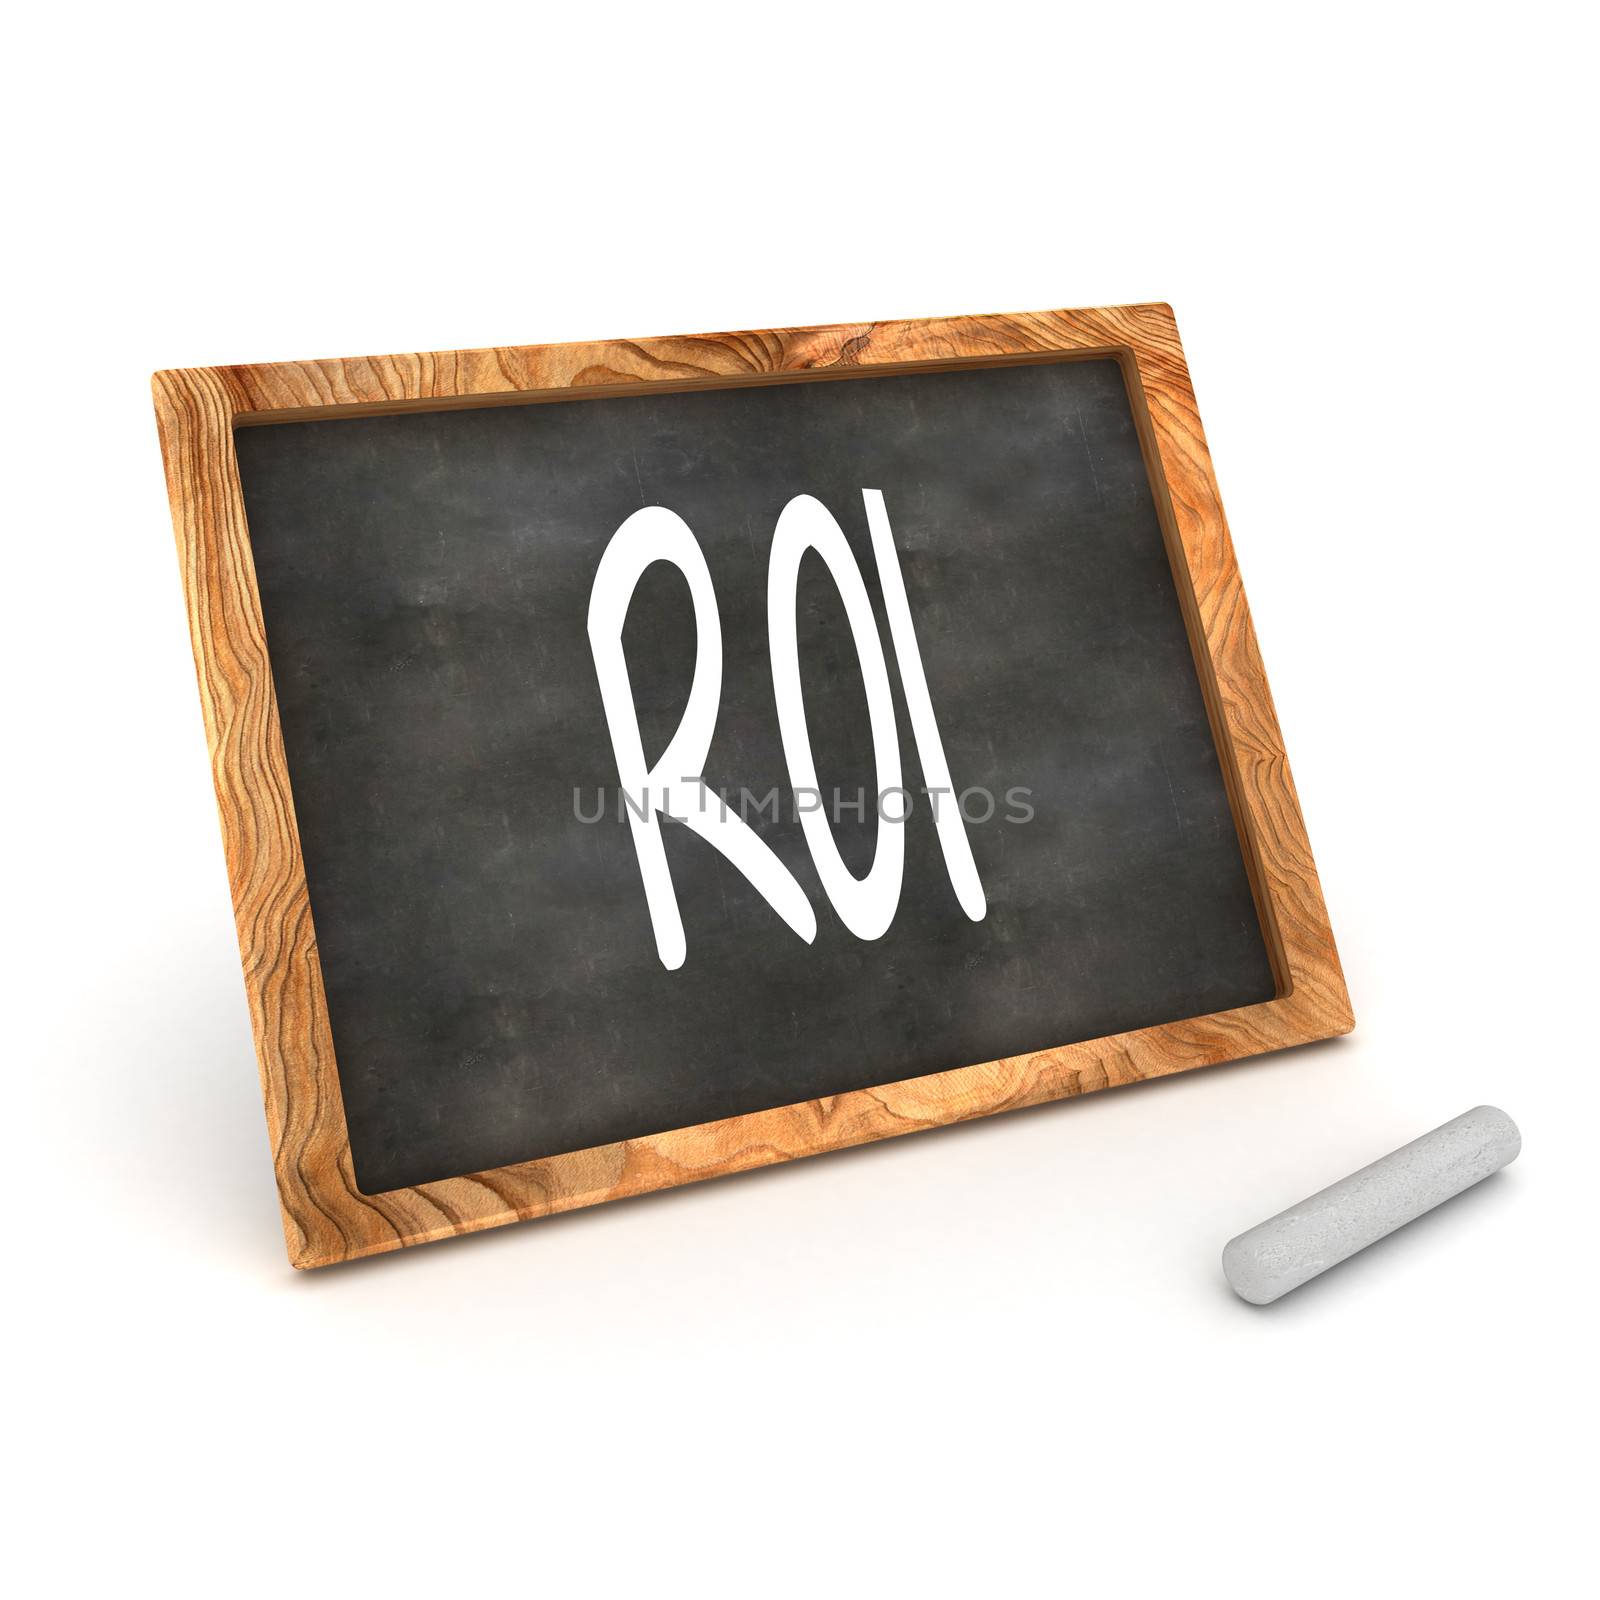 A Colourful 3d Rendered Concept Illustration showing "ROI" writen on a Blackboard with white chalk